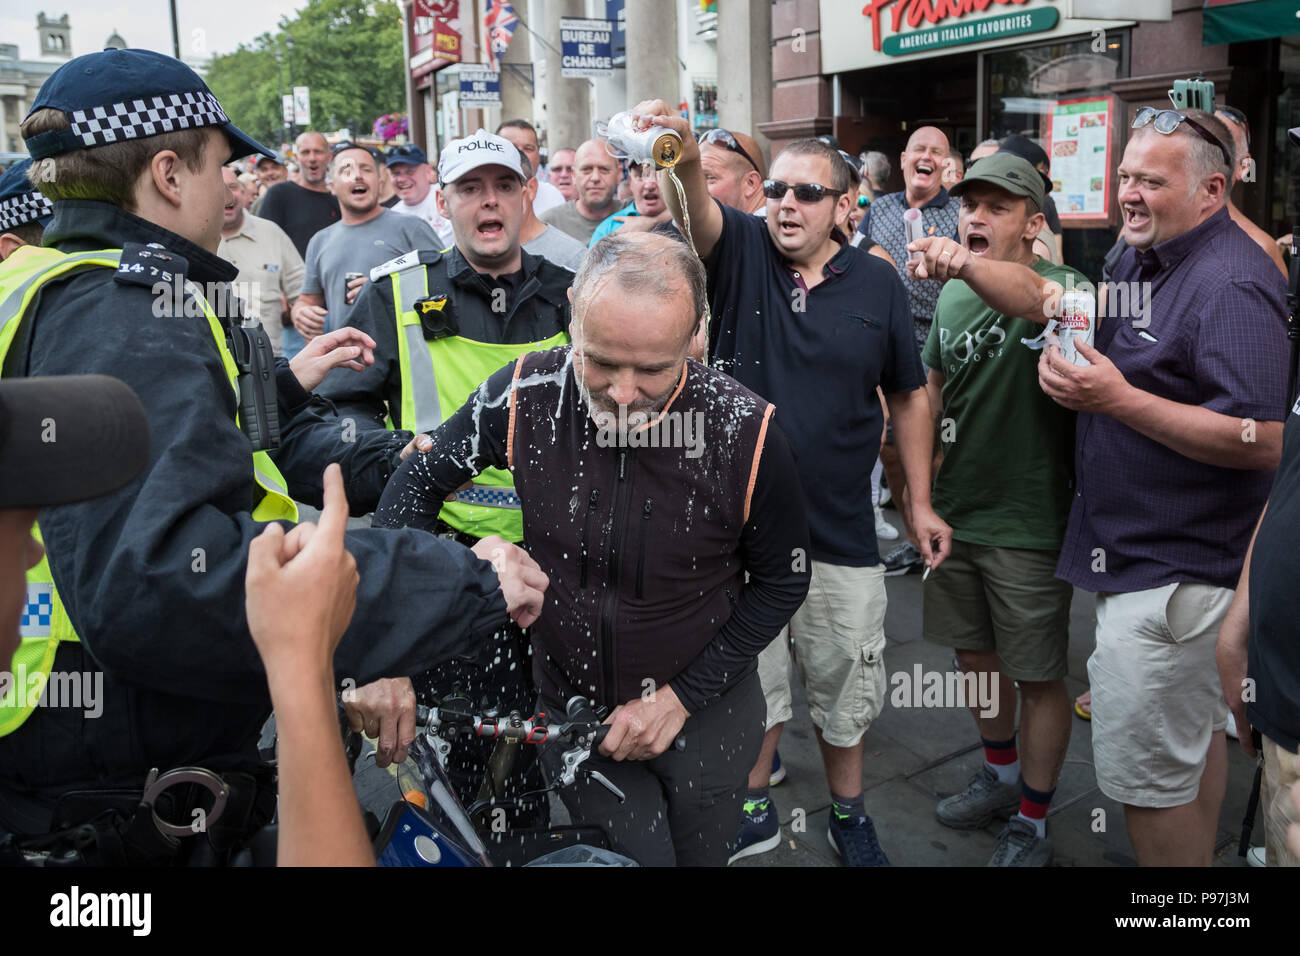 London, UK. 14th July 2018. Members of the far-right attack and pour beer over a left-wing opposition protester as thousands of pro-Trump supporters join with 'Free Tommy Robinson' protesters to rally in Whitehall. Credit: Guy Corbishley/Alamy Live News Stock Photo